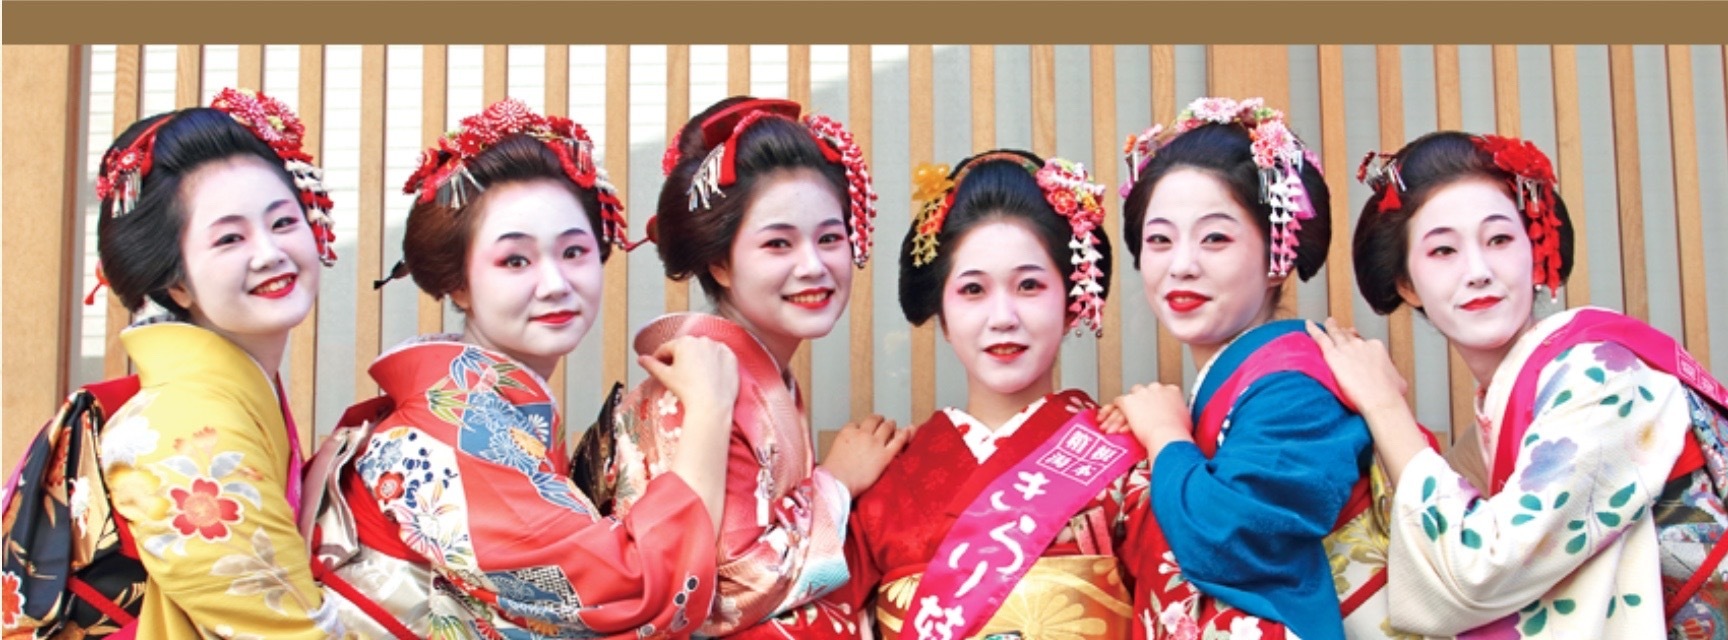 Drink With A Japanese Geisha At An Online Drinking Party Soranews24 Japan News